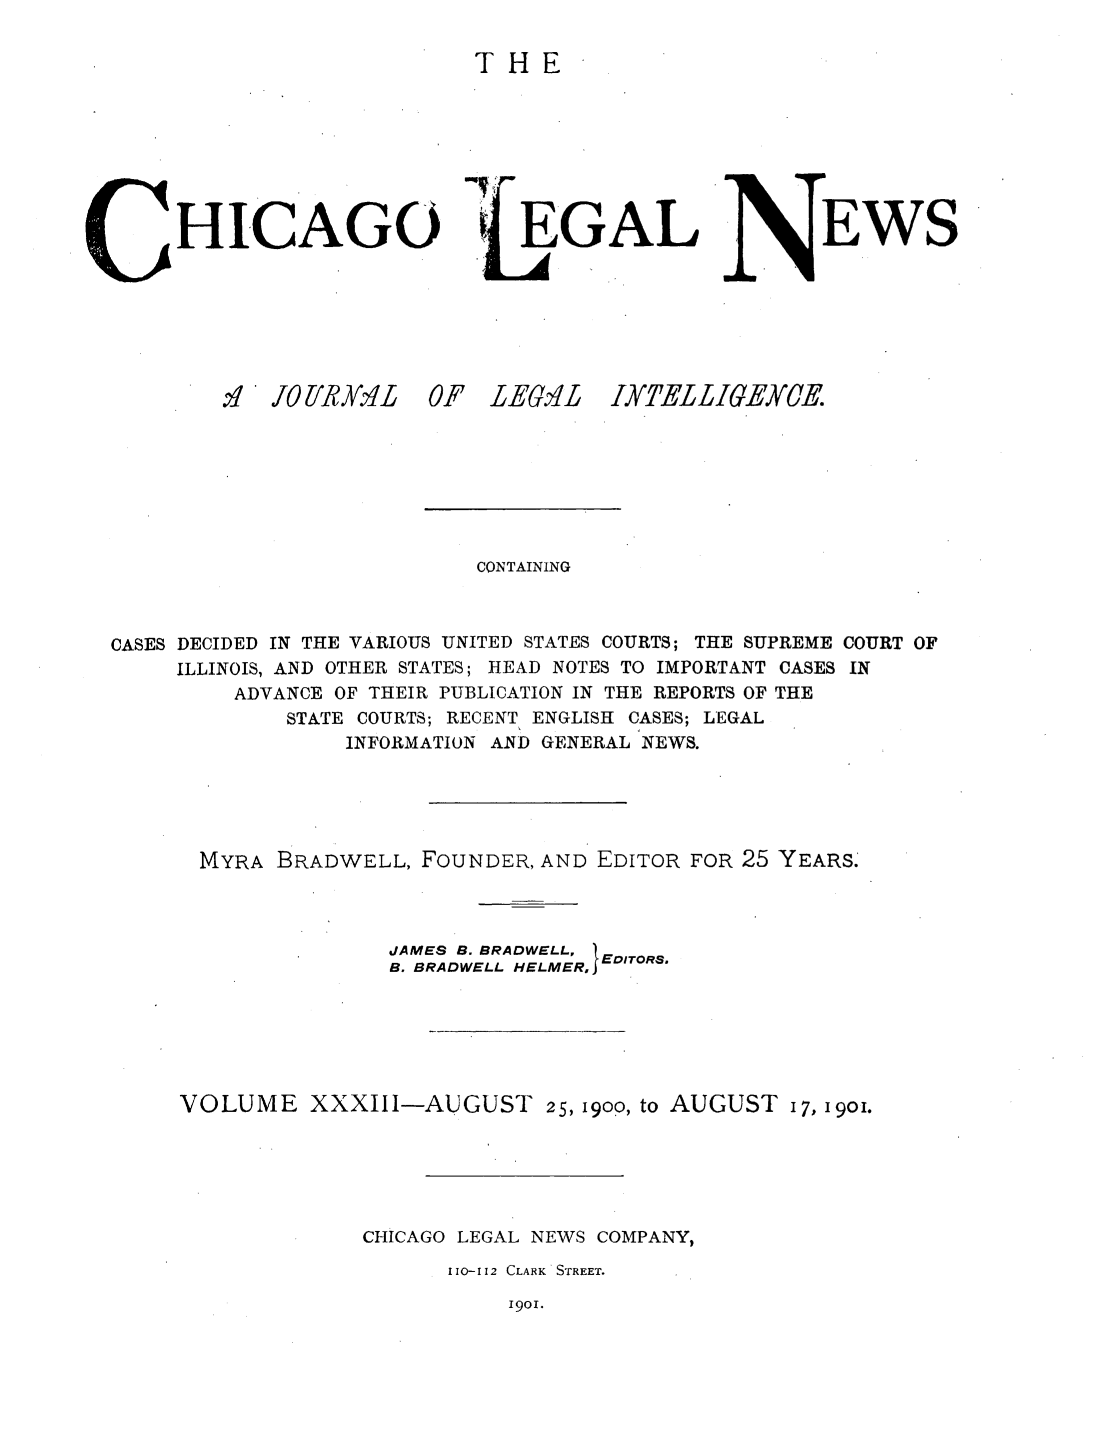 handle is hein.journals/chiclene33 and id is 1 raw text is: THEHICAGO.:,I  OII/ 'L  0EGALF LEG>ILEWSCONTAININGCASES DECIDED IN THE VARIOUS UNITED STATES COURTS; THE SUPREME COURT OFILLINOIS, AND OTHER STATES; HEAD NOTES TO IMPORTANT CASES INADVANCE OF THEIR PUBLICATION IN THE REPORTS OF THESTATE COURTS; RECENT ENGLISH CASES; LEGALINFORMATION AND GENERAL NEWS.MYRA BRADWELL, FOUNDER, AND EDITOR FOR 25 YEARS.JAMES B. BRADWELL, TB. BRADWELL HELMER,lEDITORS.VOLUME XXXIII-AUGUST 25, 1900, to AUGUST 17, 19oi.CHICAGO LEGAL NEWS COMPANY,110-112 CLARK STREET.1901.I]ELLIGEYCE.